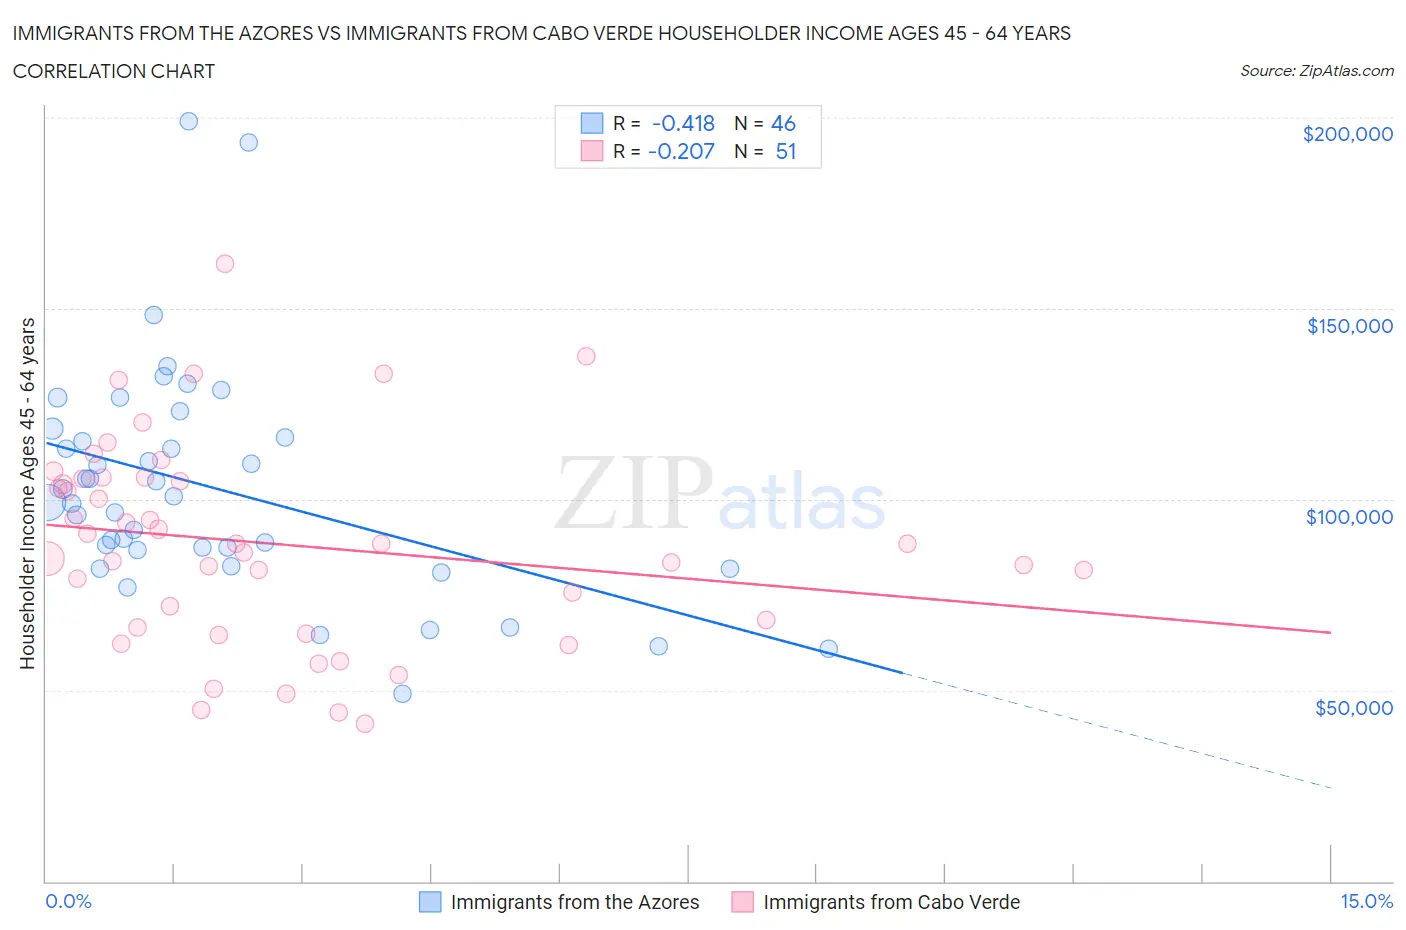 Immigrants from the Azores vs Immigrants from Cabo Verde Householder Income Ages 45 - 64 years